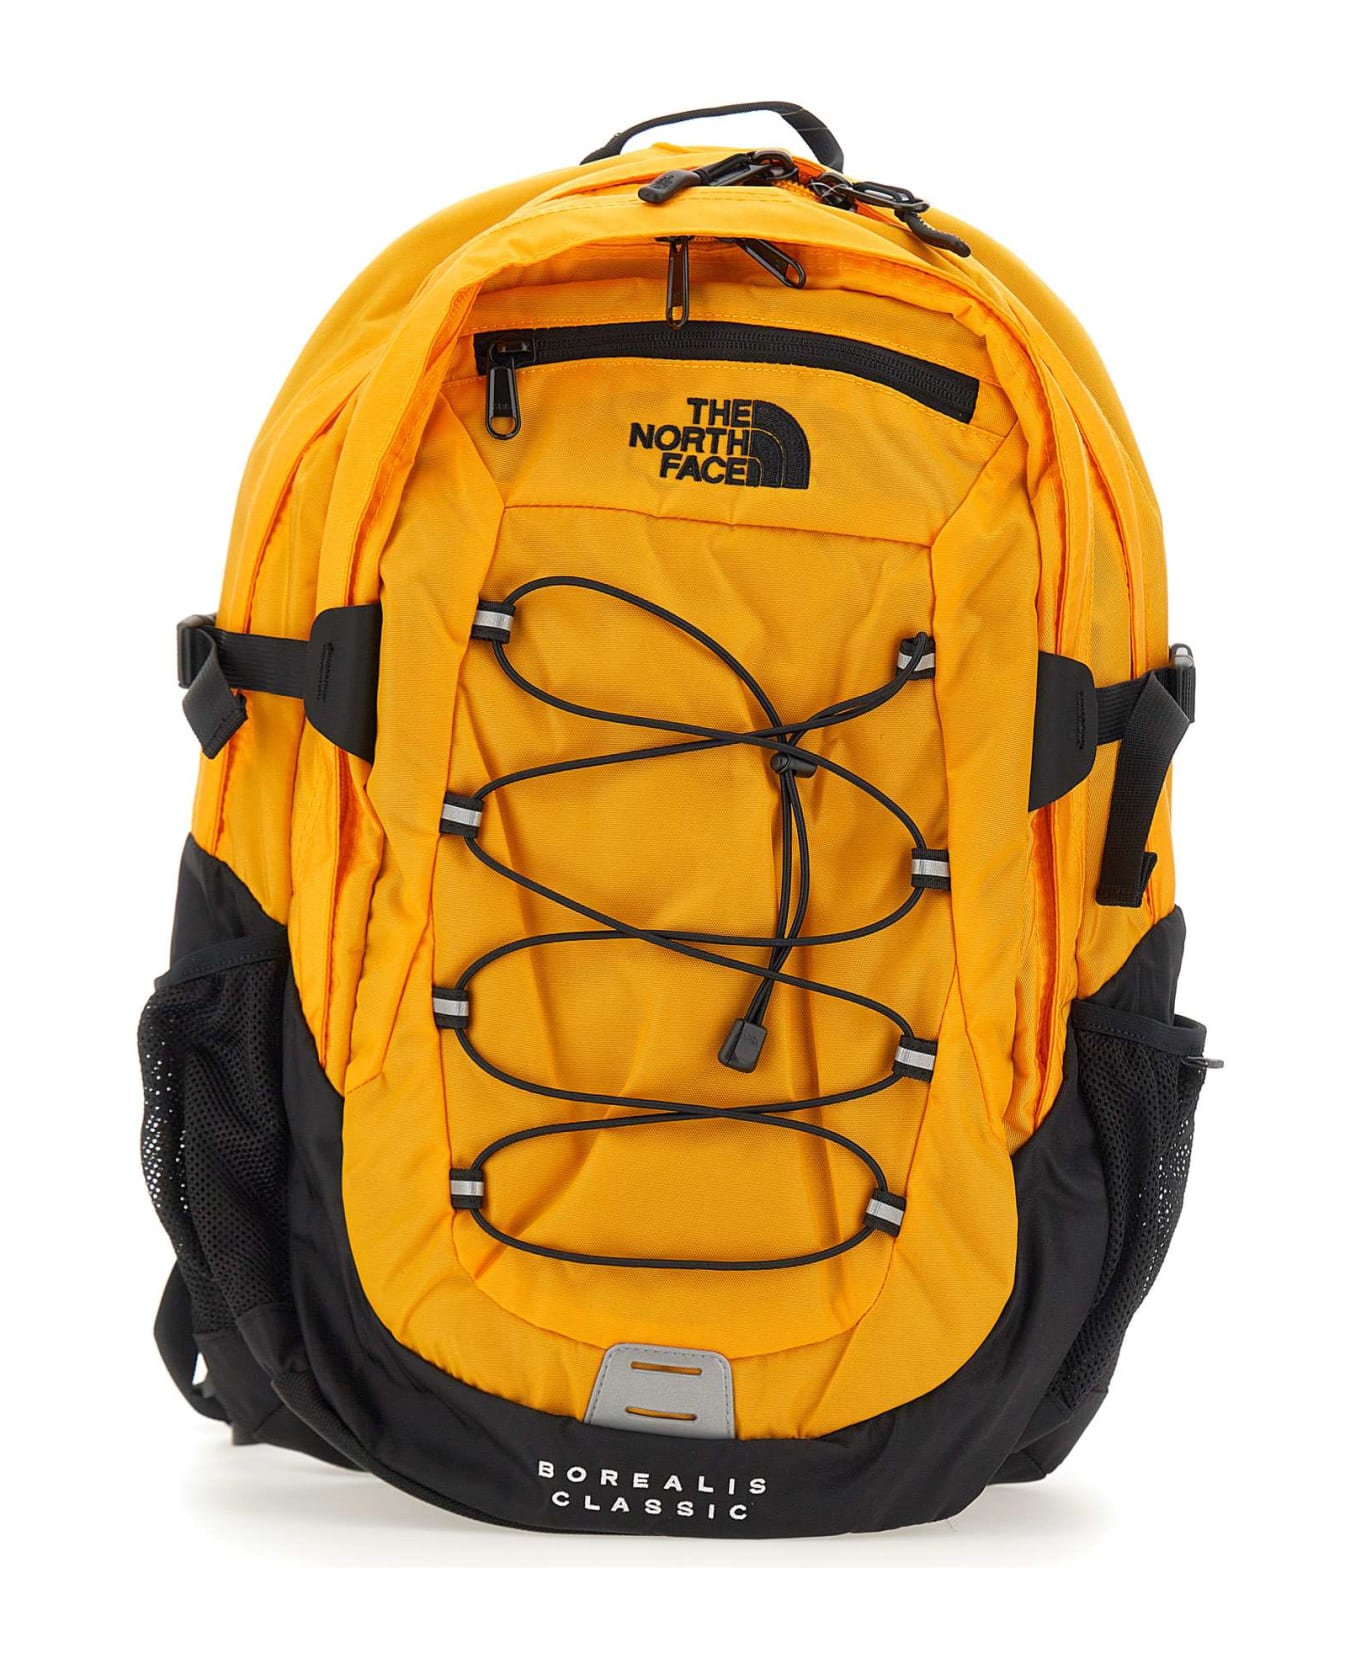 The North Face "borealis Classic" Backpack - YELLOW バックパック